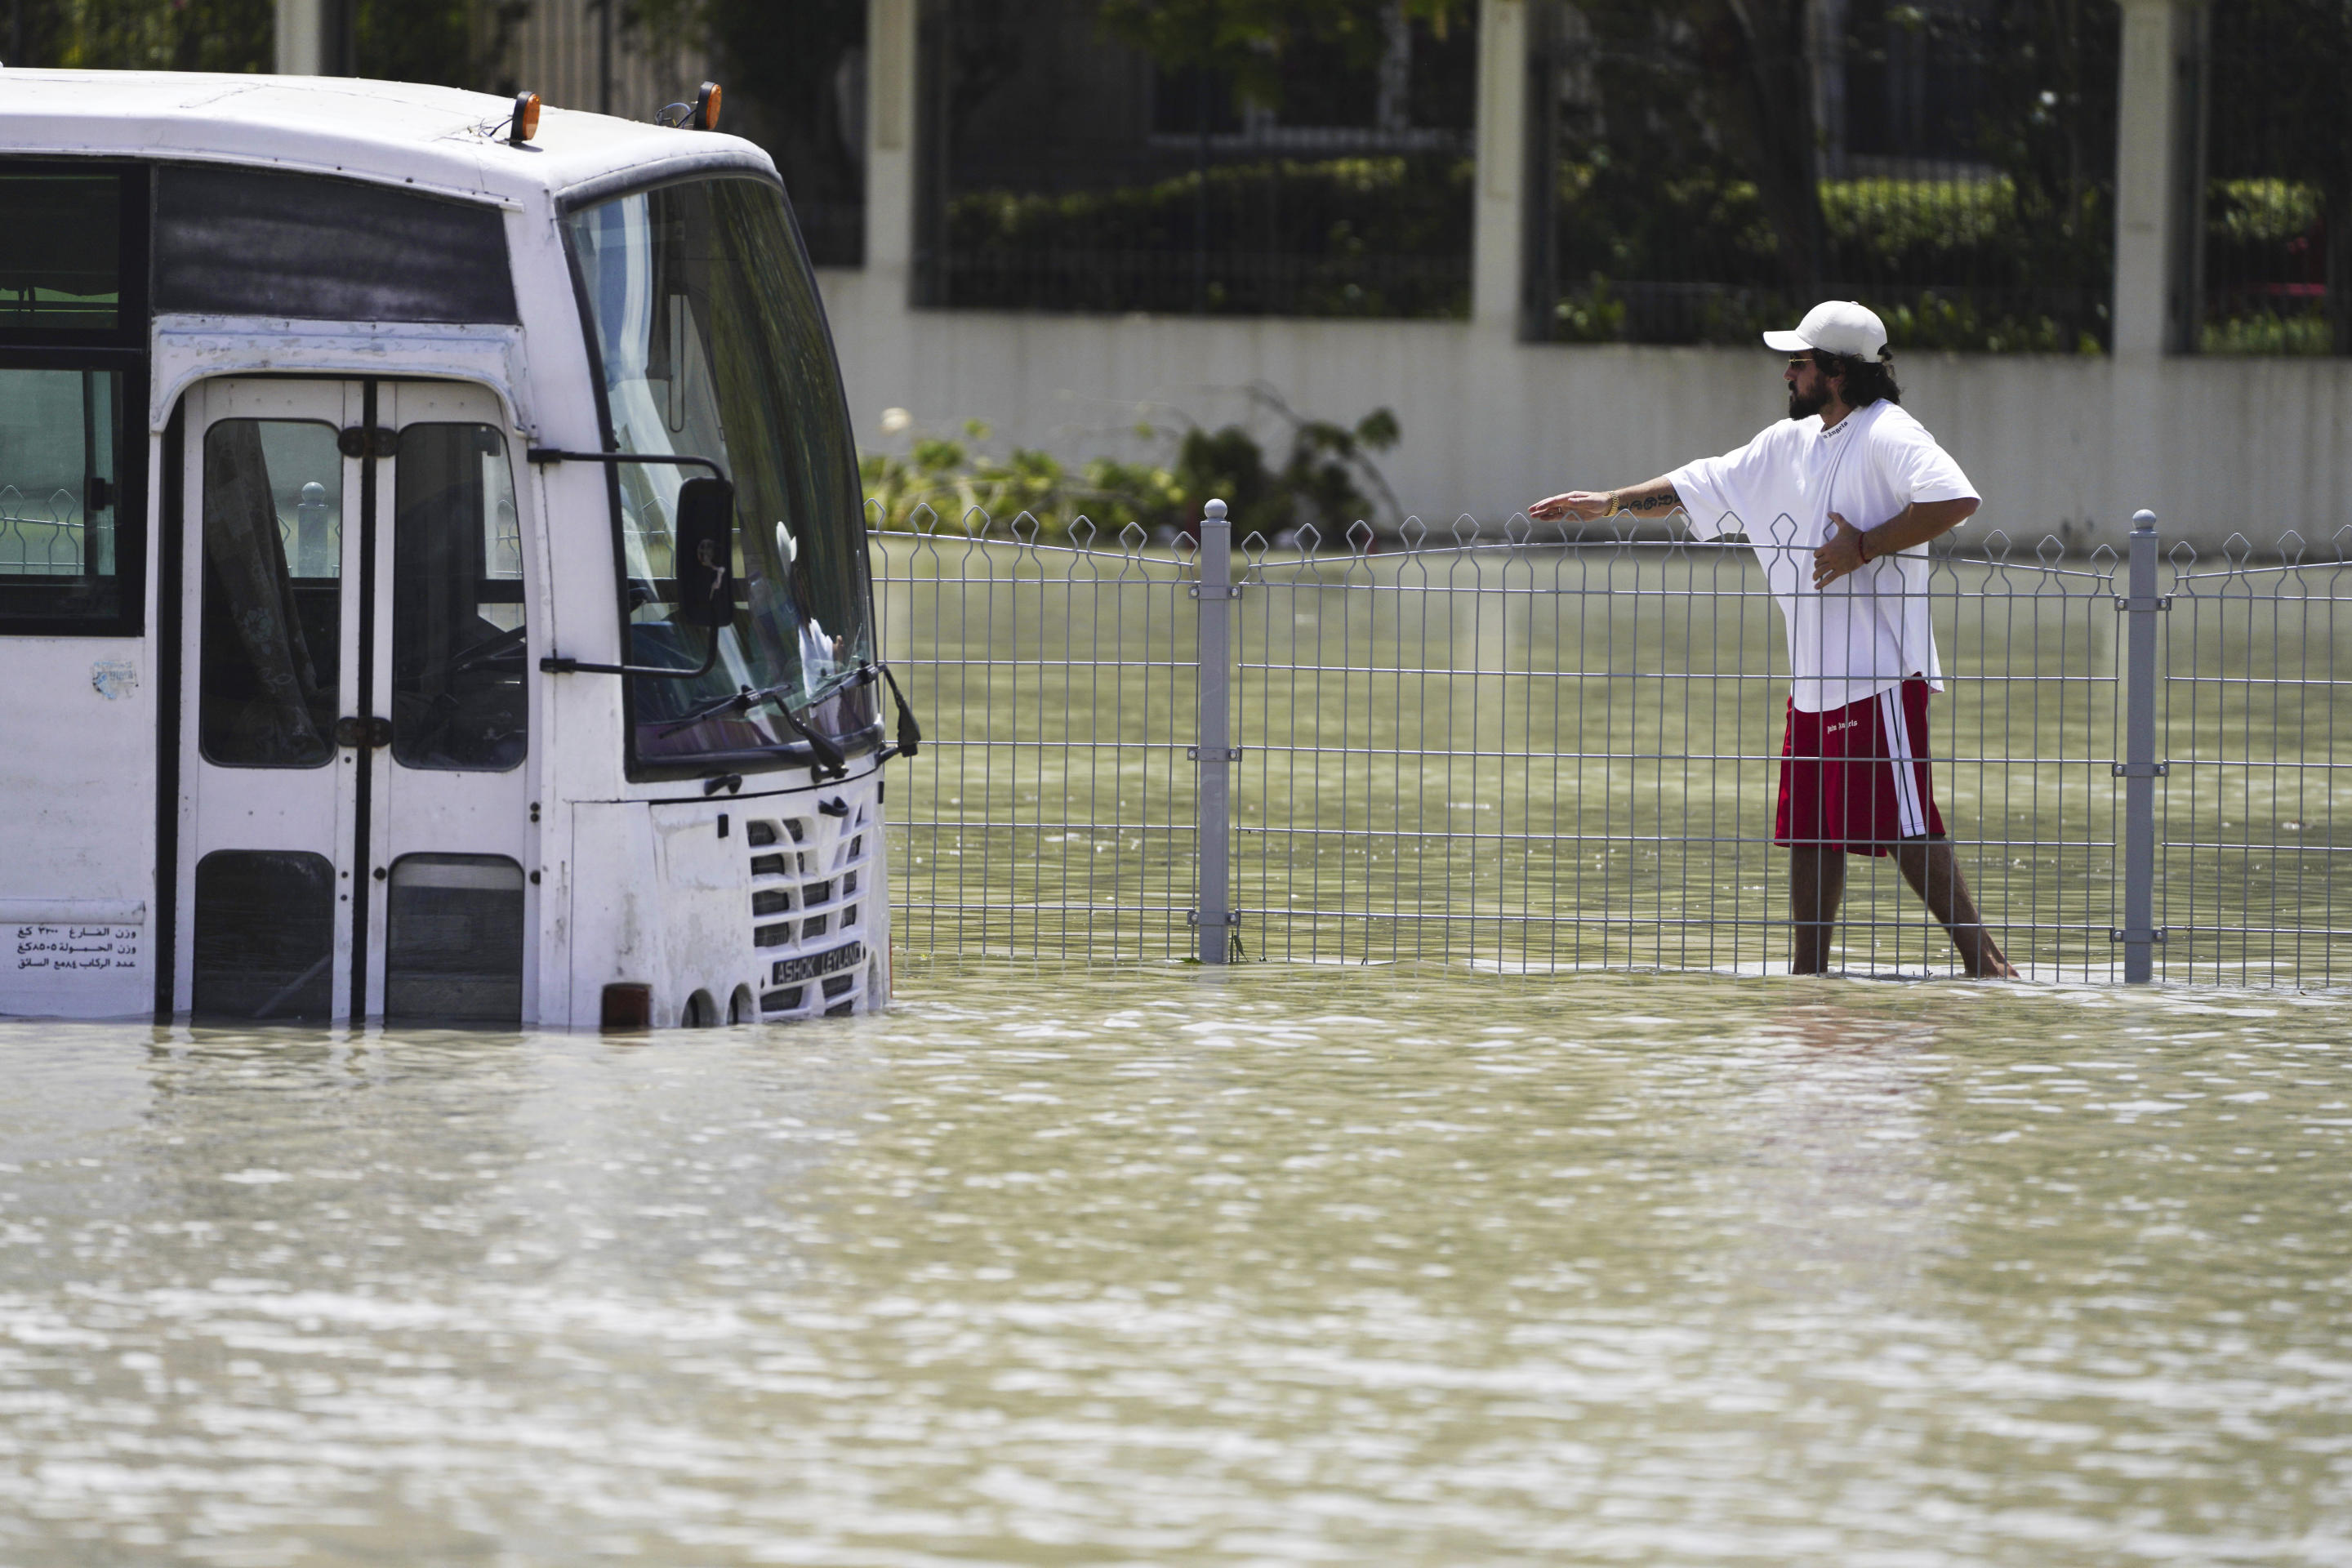 A man clings to a fence as he walks through floodwaters in Dubai.